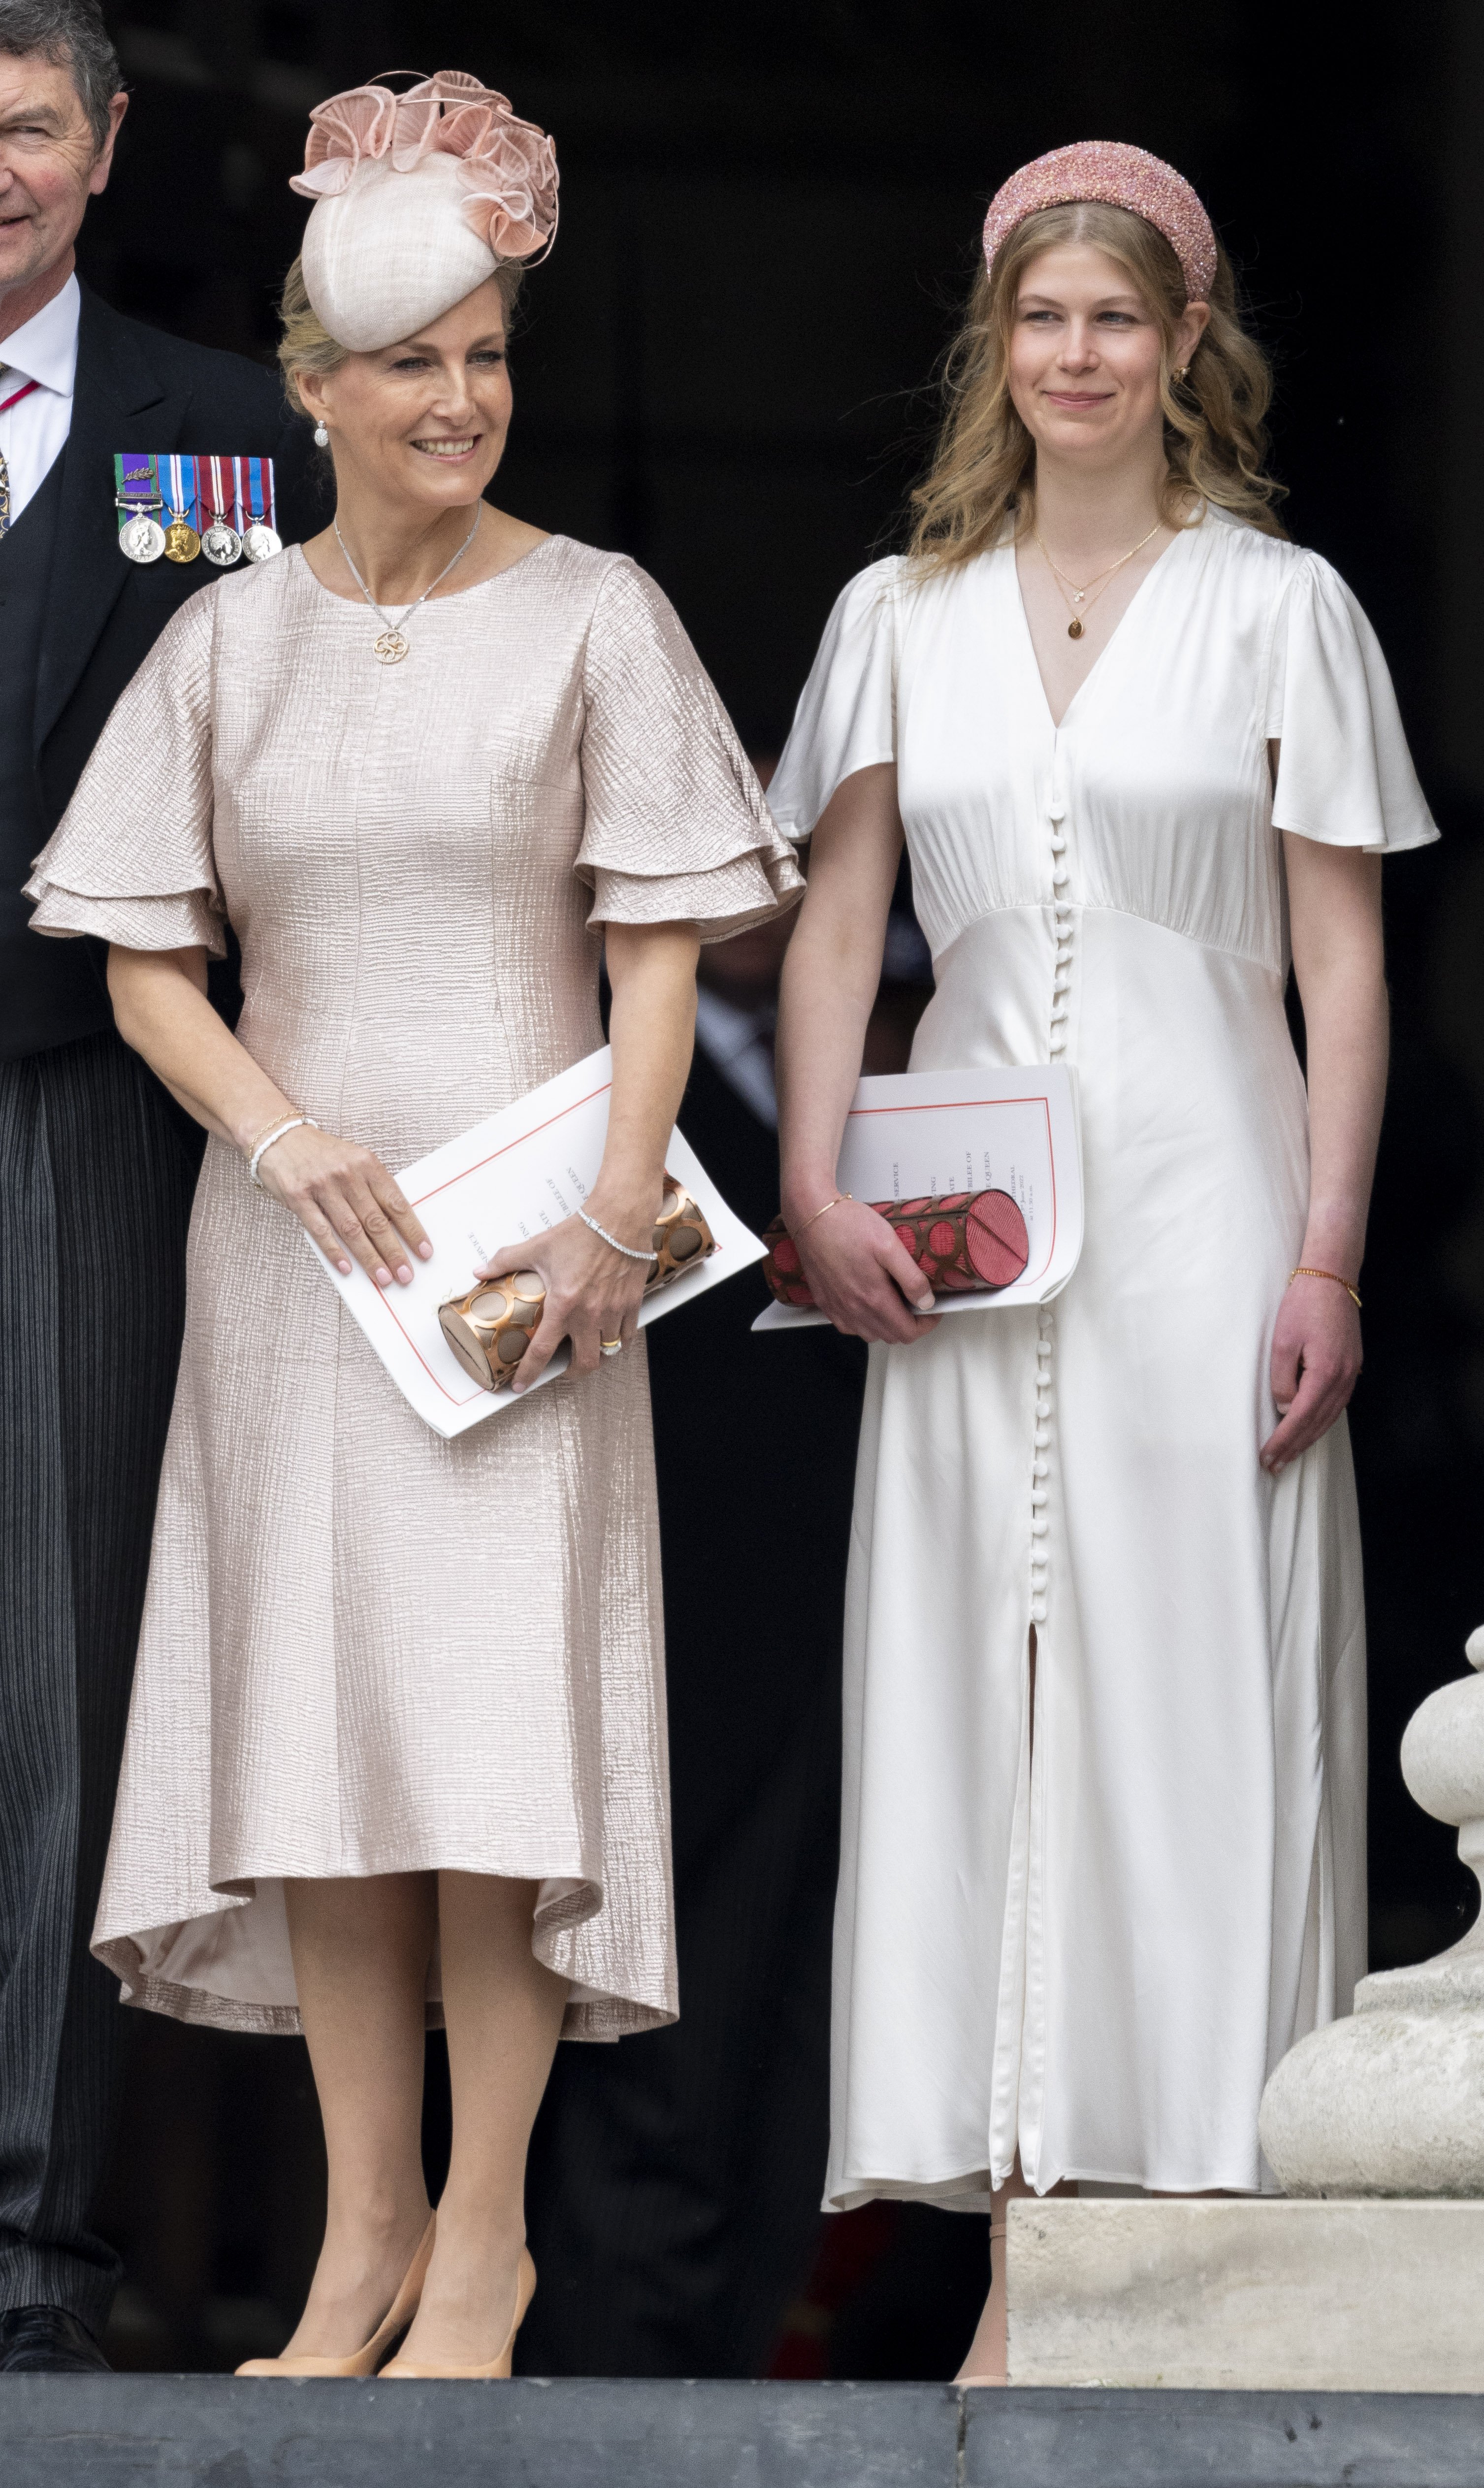 Sophie, Countess of Wessex and Lady Louise Windsor attend a National Service of Thanksgiving for the Queens reign at St Pauls Cathedral on June 3, 2022 in London, England. | Source: Getty Images